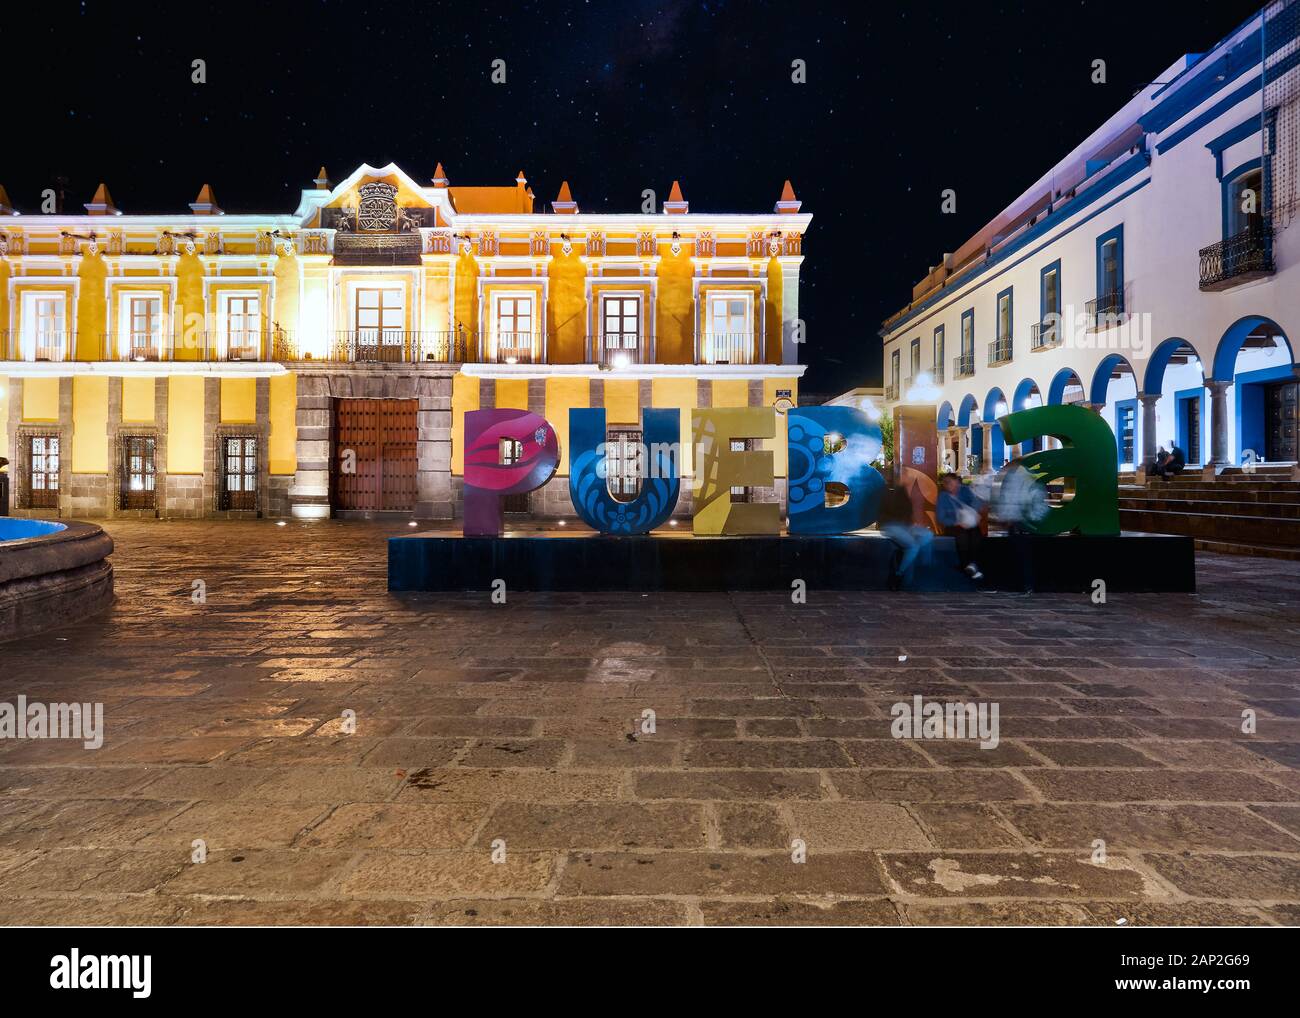 Puebla de Zaragoza, Mexico, October 15, 2018 - Main Theater square with giant letters of Puebla and porch of Secretary of Health at night Stock Photo